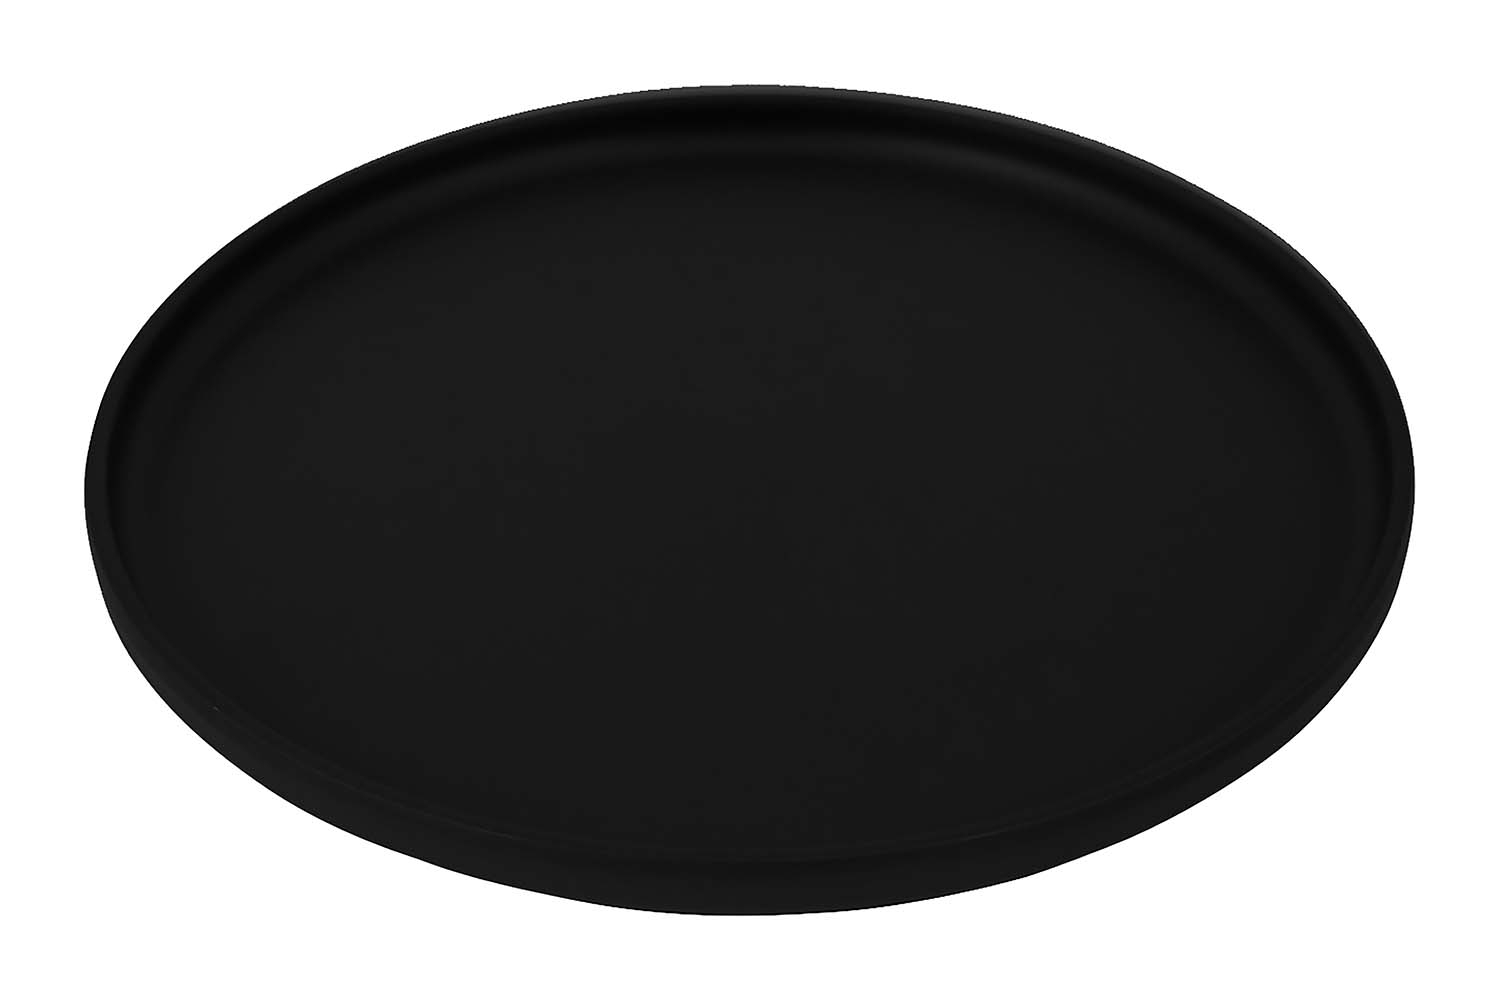 Bo-Camp - Industrial collection - Tableware - Patom - Melamine - 16 Pieces - Black detail 3